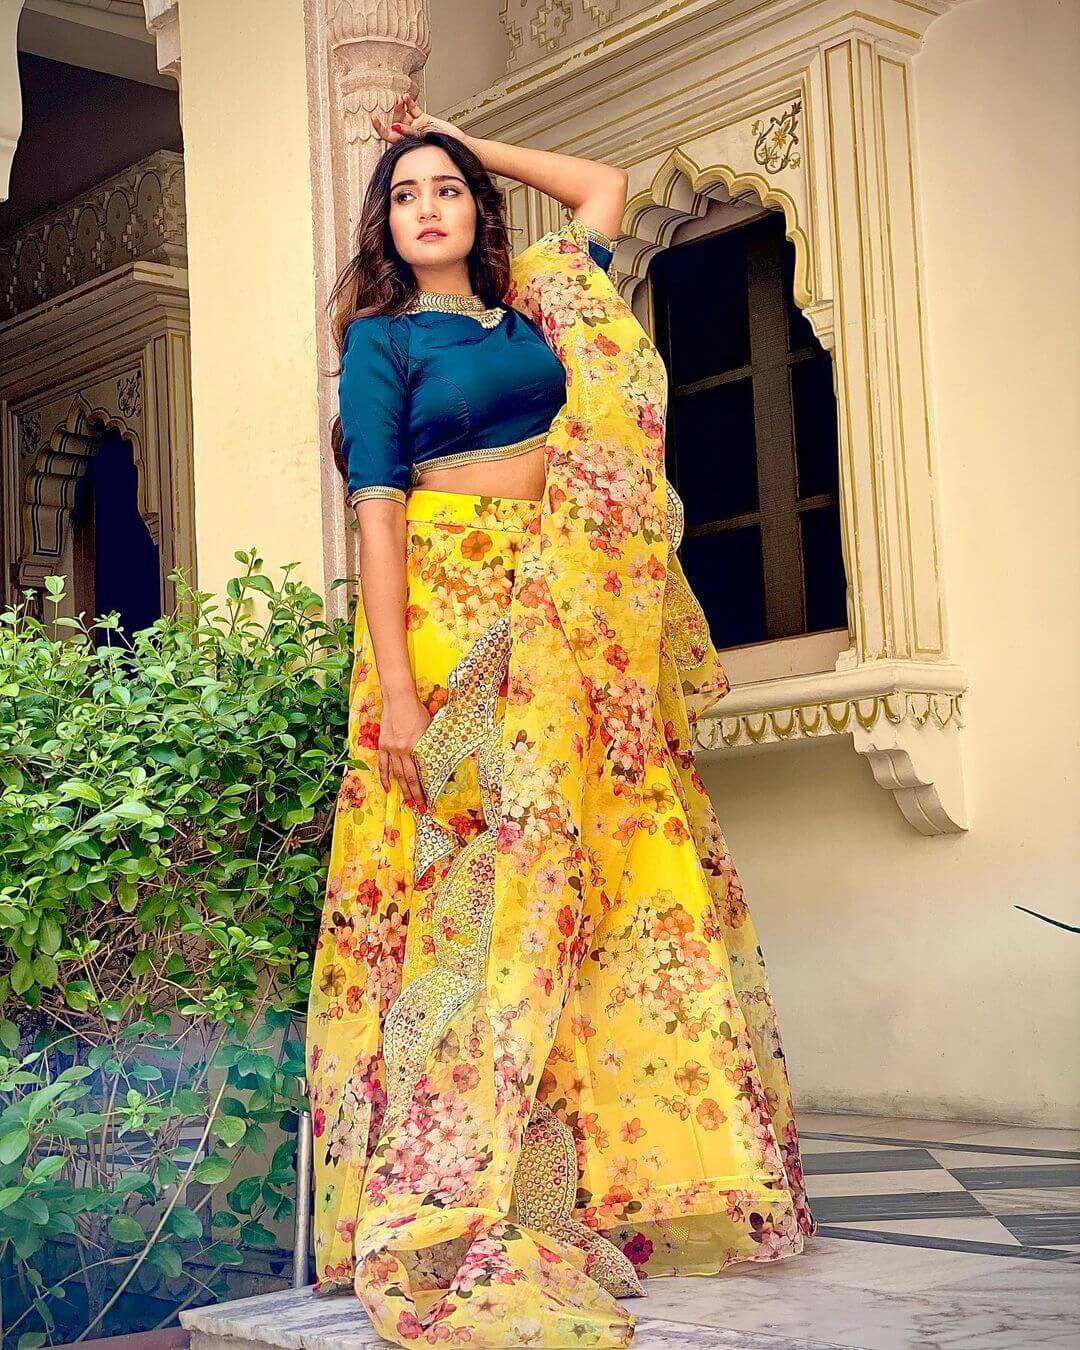 Ashi Gives Us Major Bridmaids Outfit Goals In Blue And Yellow Organza Lehenga Outfit Ashi Singh Fabulous Outfit and Style